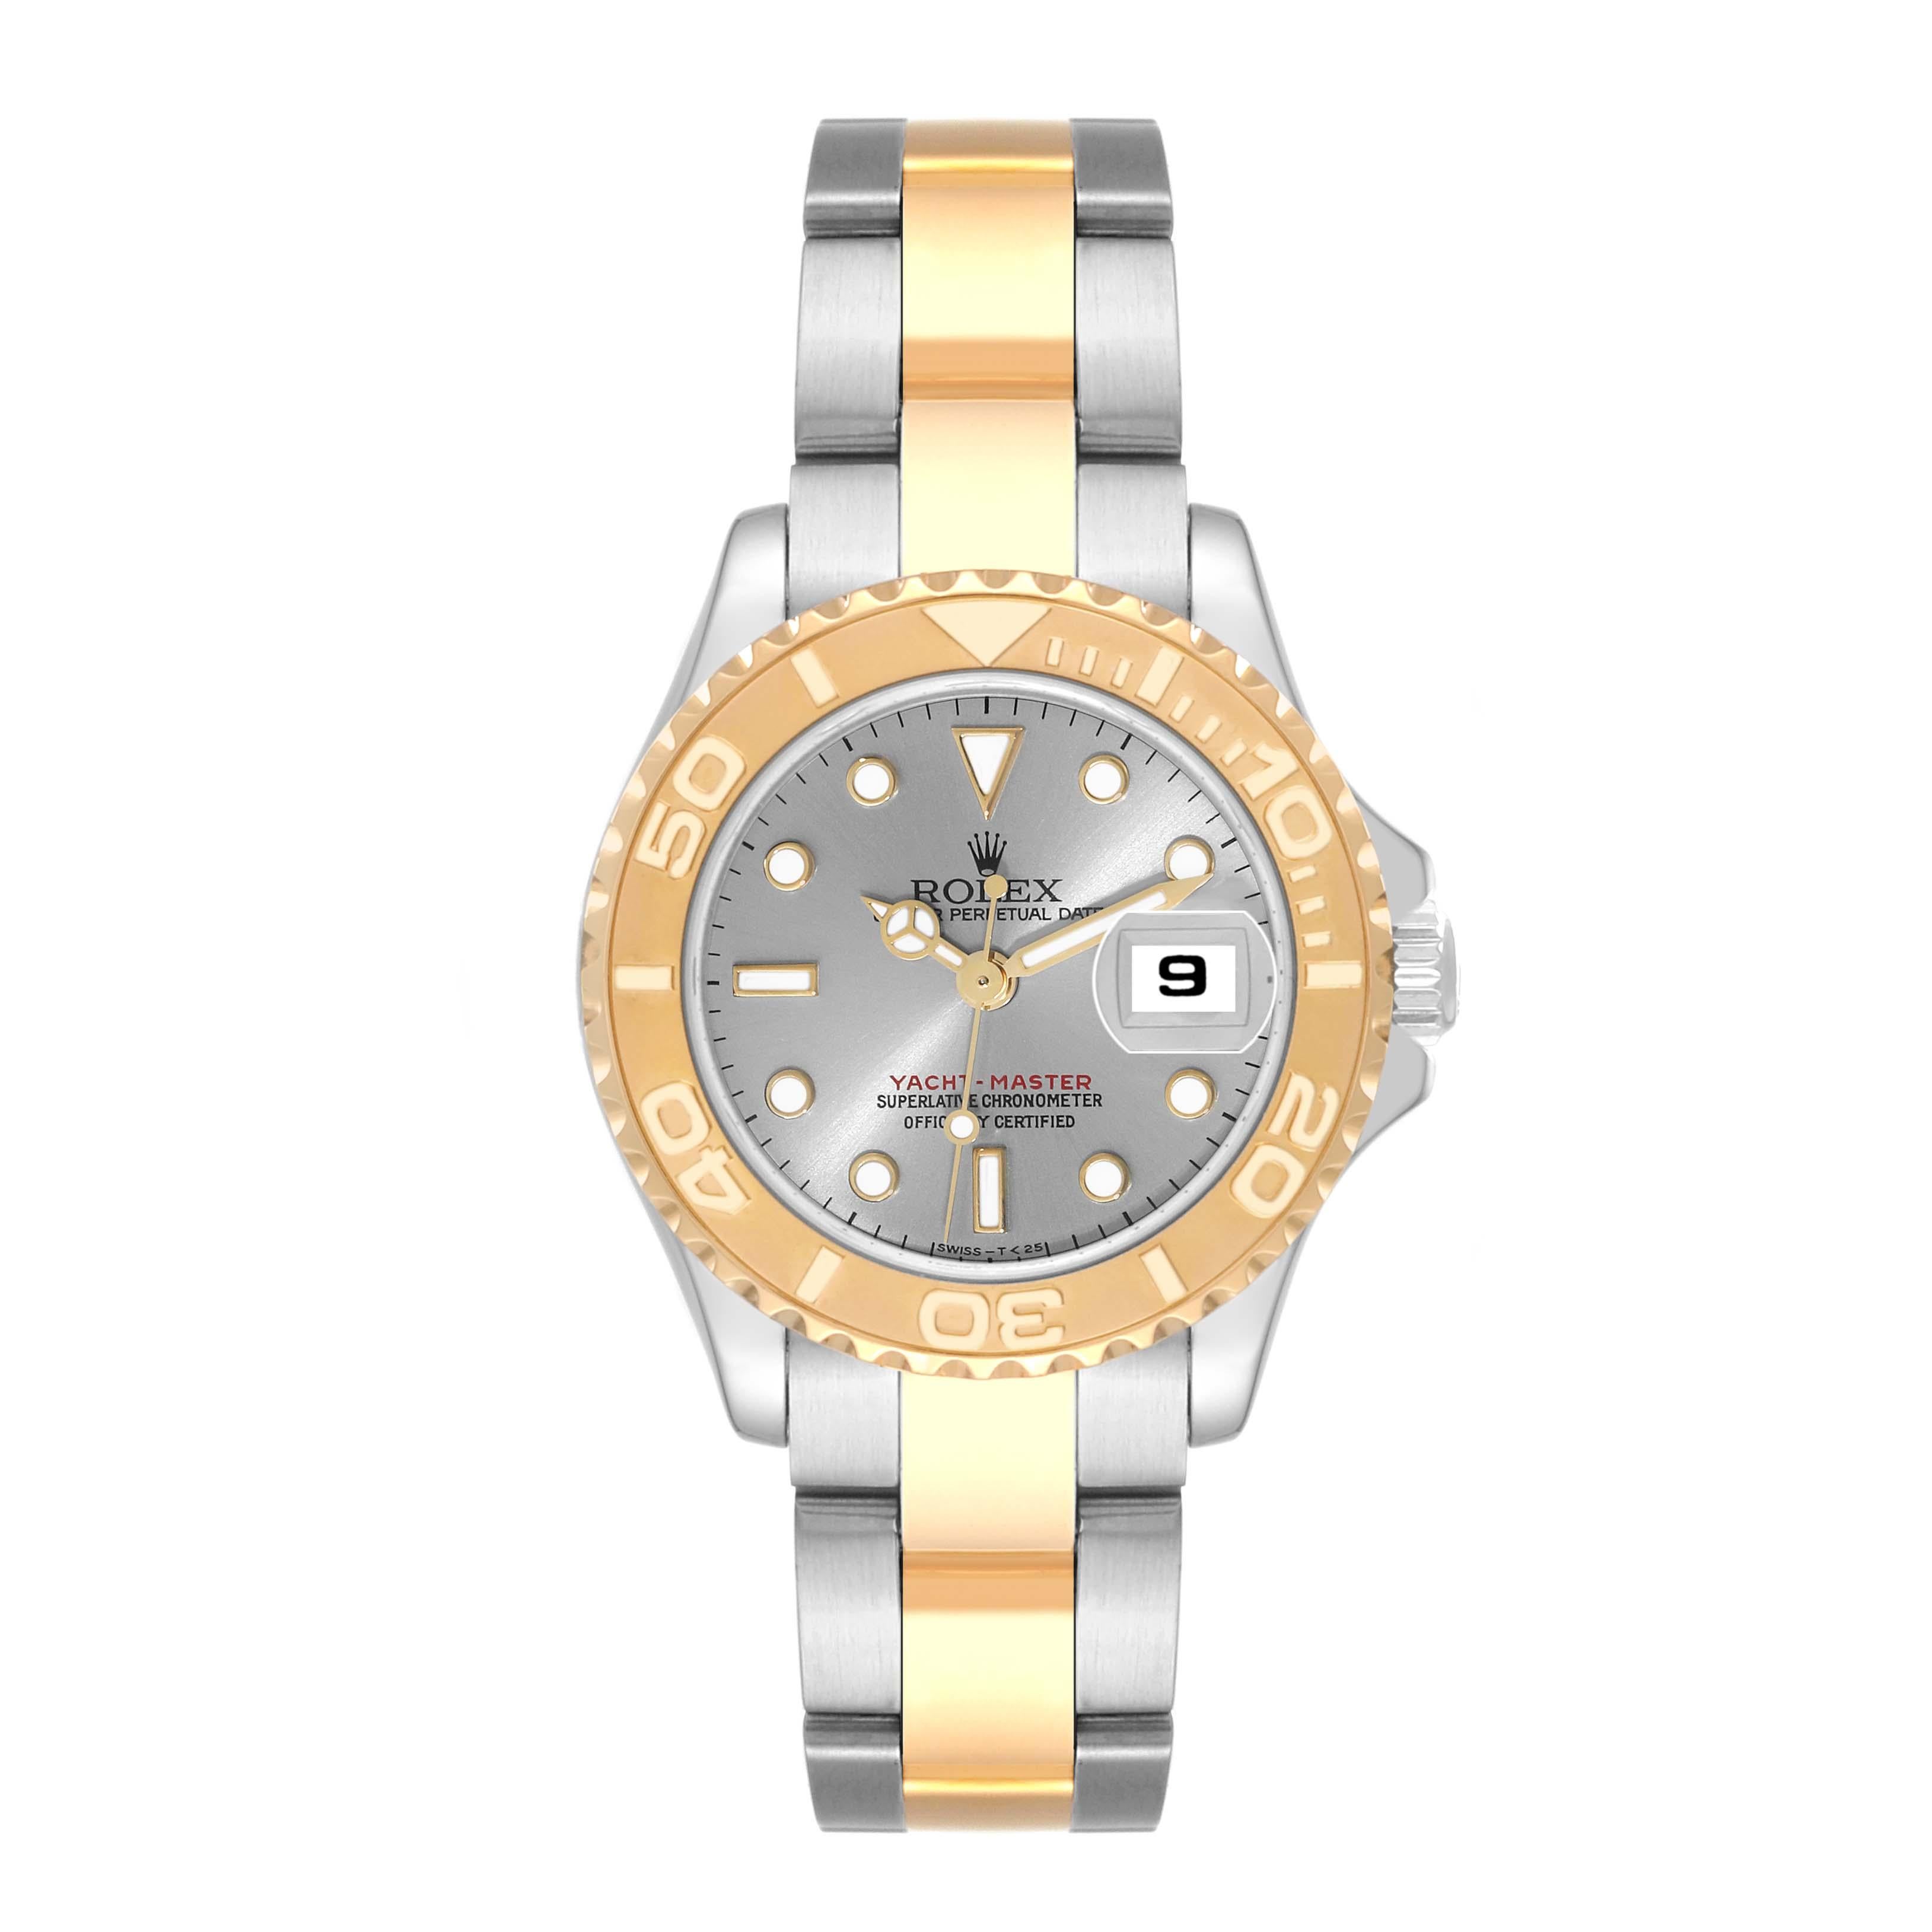 Rolex Yachtmaster Steel Yellow Gold Slate Dial Ladies Watch 69623. Officially certified chronometer self-winding movement. Stainless steel and 18K yellow gold case 29 mm in diameter. Rolex logo on a crown. 18K yellow gold special time-lapse